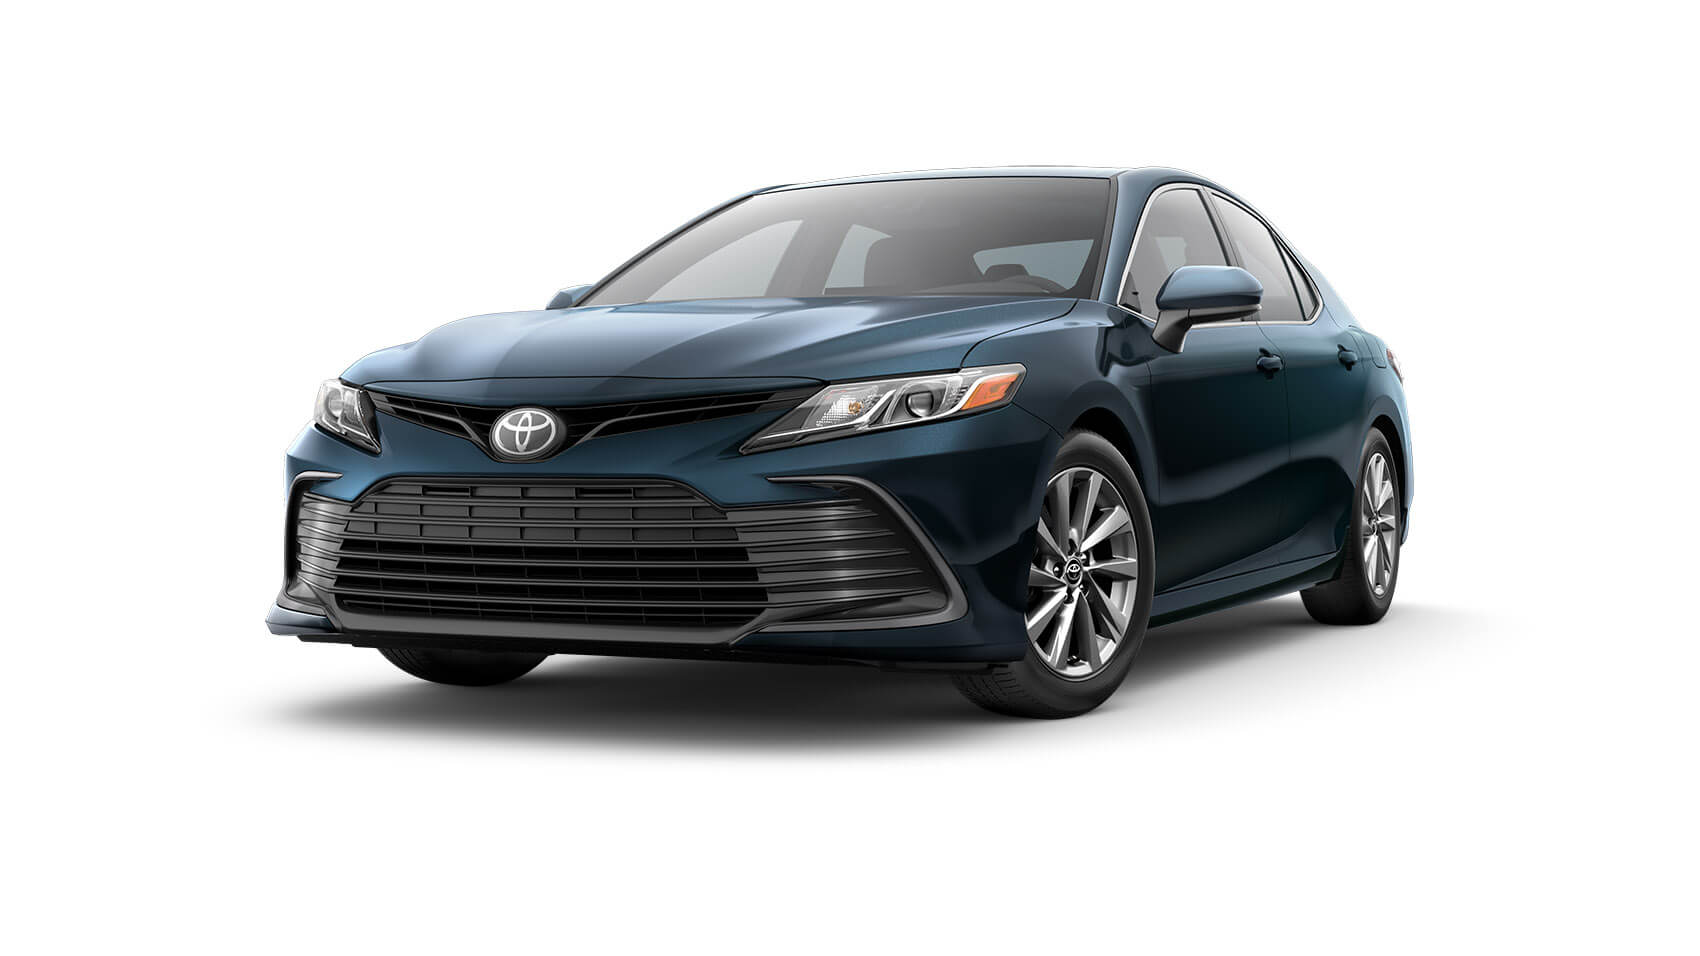 Toyota Camry Exterior Dimensions